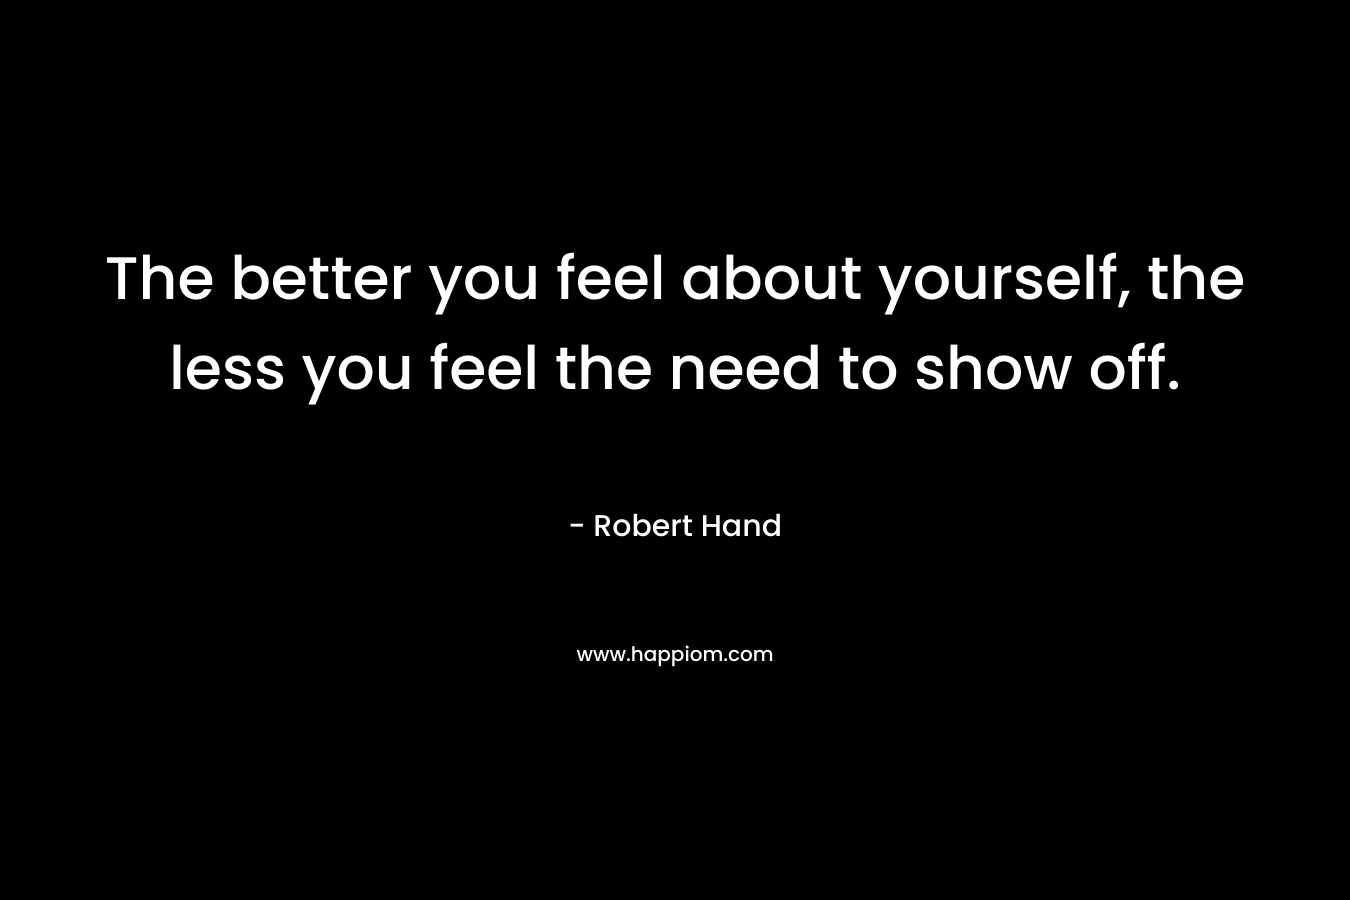 The better you feel about yourself, the less you feel the need to show off.